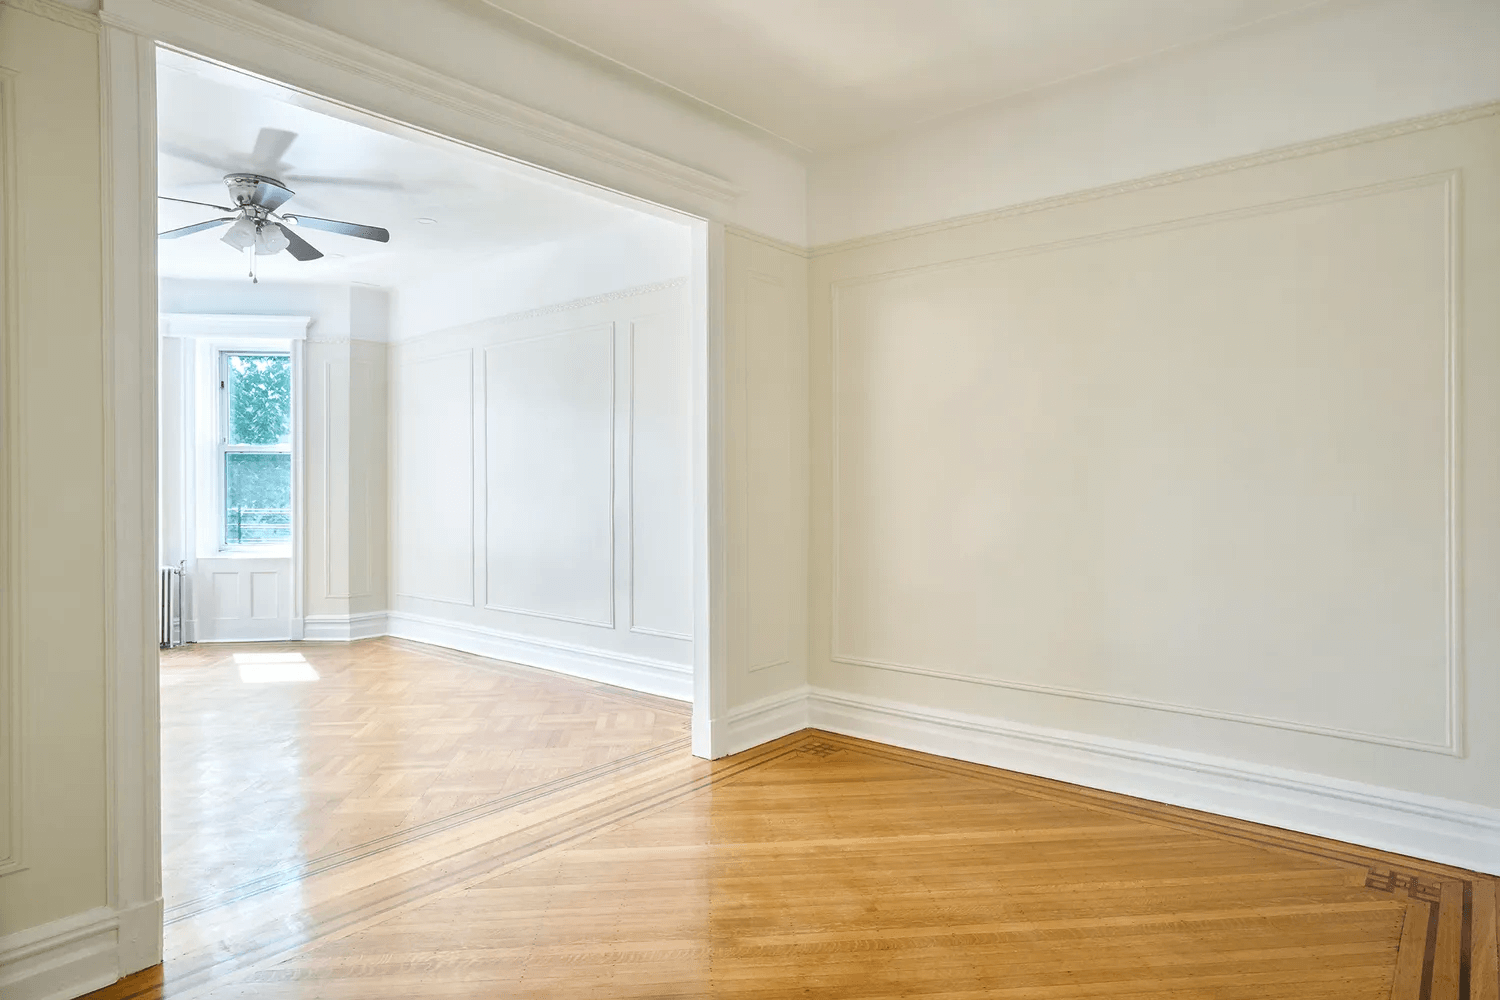 middle room with picture rails and wall moldings